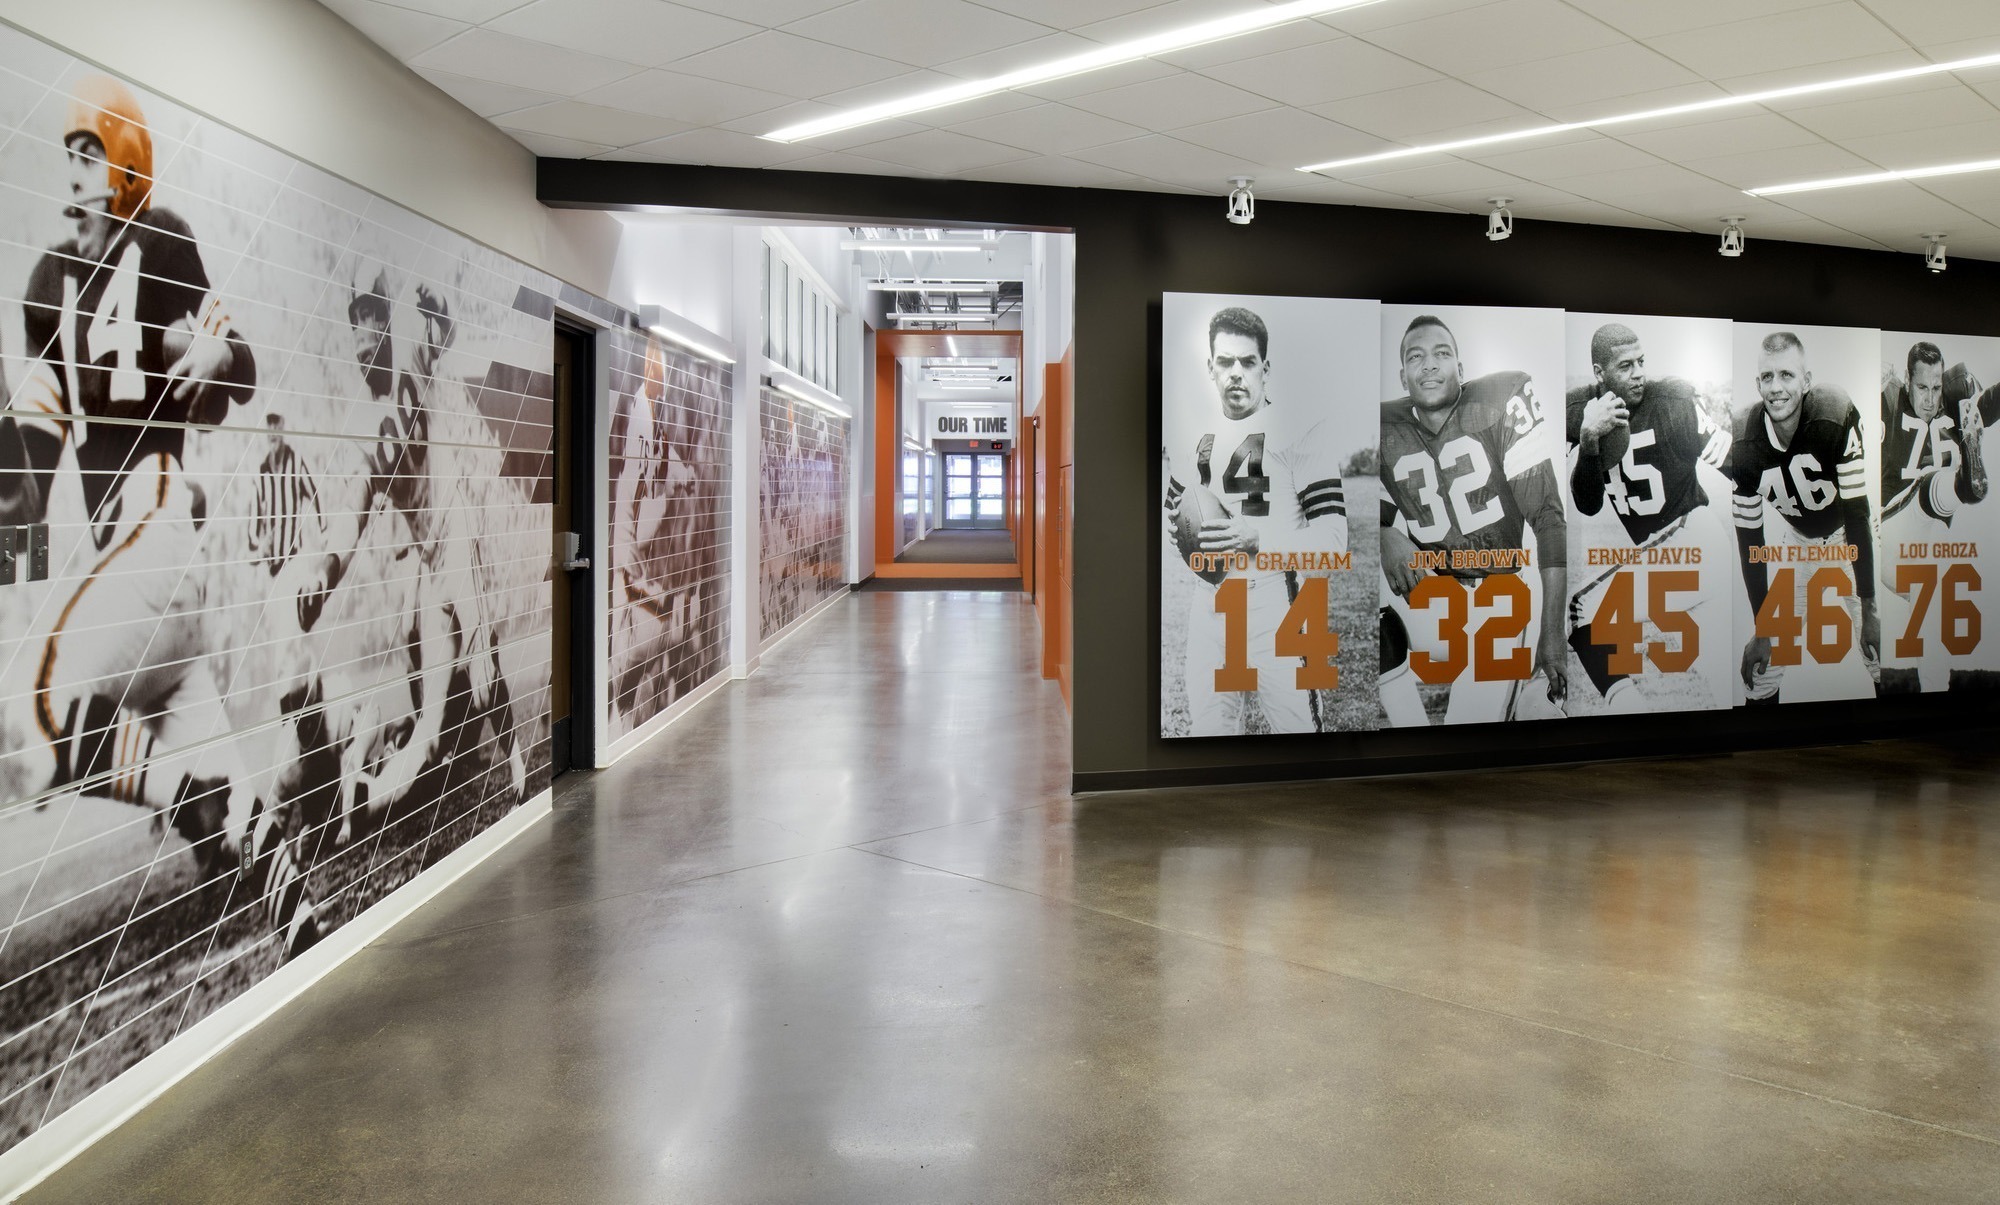 Custom wall graphics that were printed and installed by CS inside of the Cleveland Browns Facility.